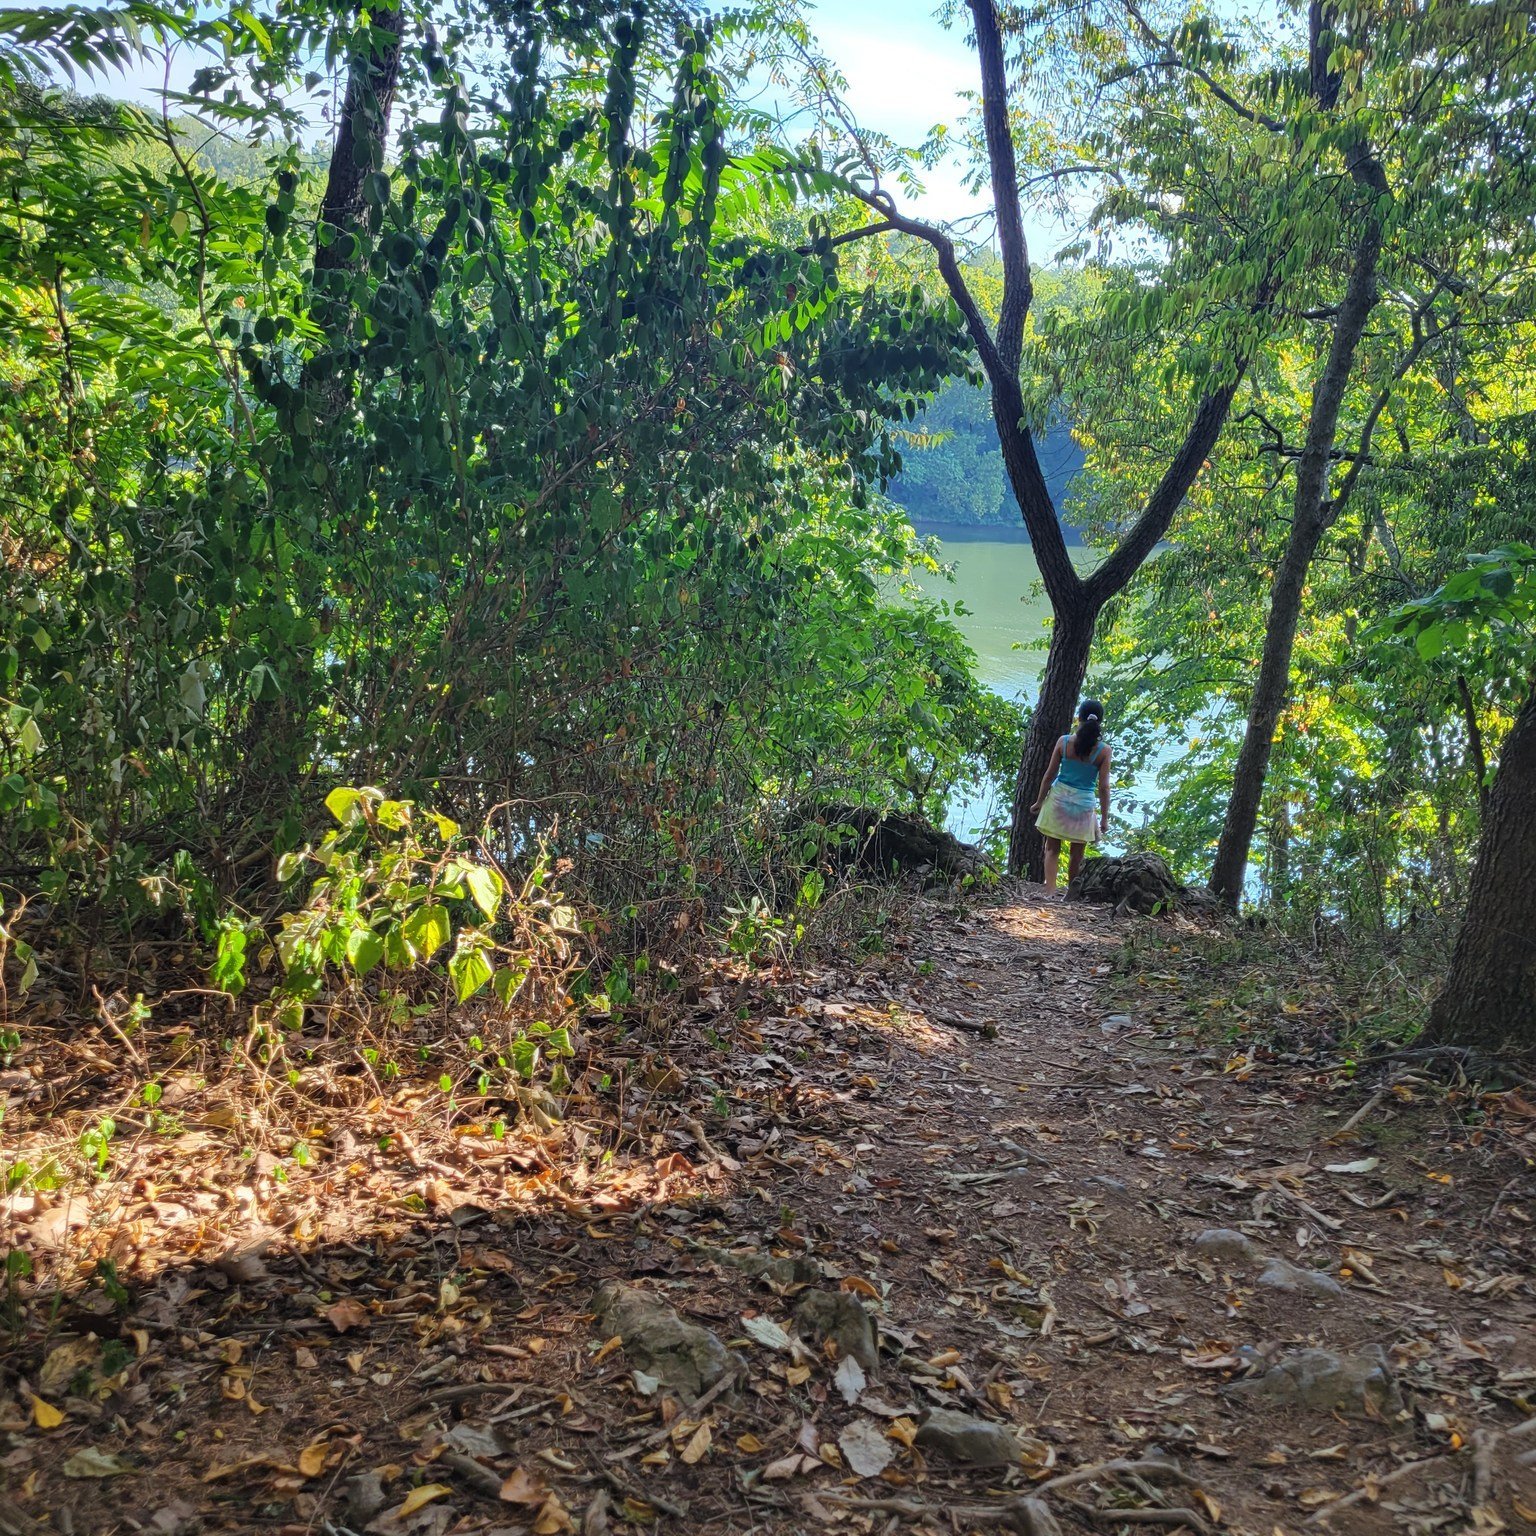 Plan a trip to Yankauer Preserve for a short walk and enjoy nature. Don't forget to take a peek at the Potomac Rives, and listen to the birds.
Visit https://www.potomacaudubon.org/preserves/yankauer/ to learn more about Yankauer Preserve and the Poto